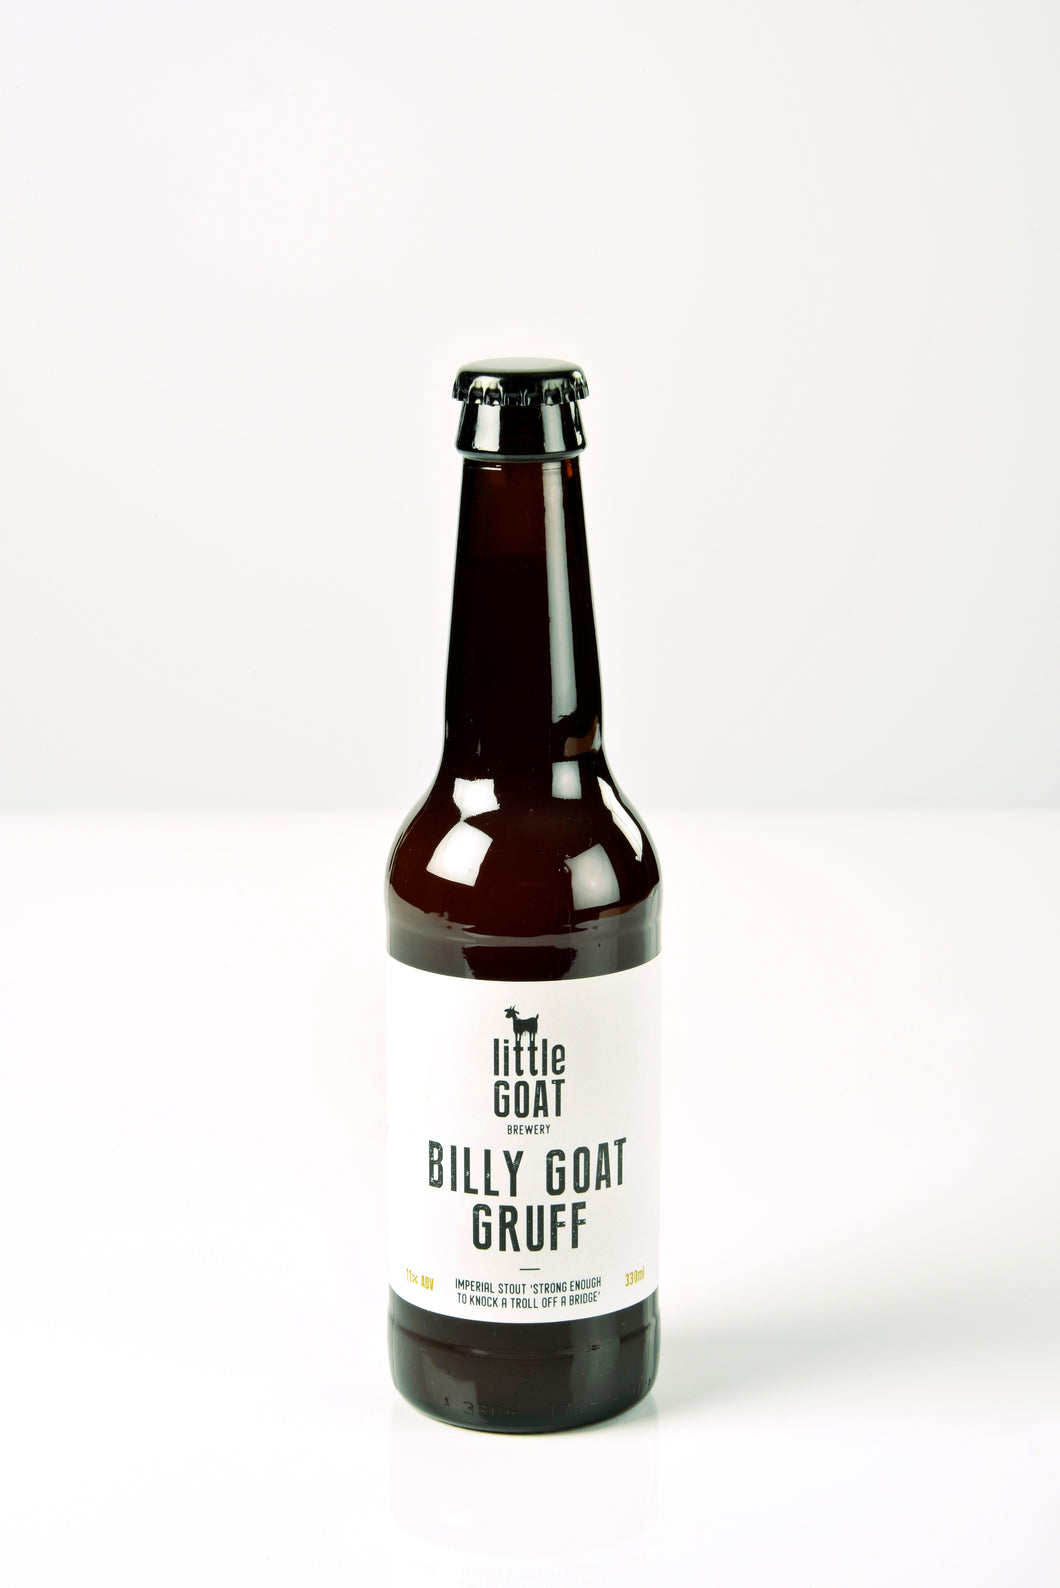 Billy Goat Gruff - Imperial Russian Stout - 11% ABV